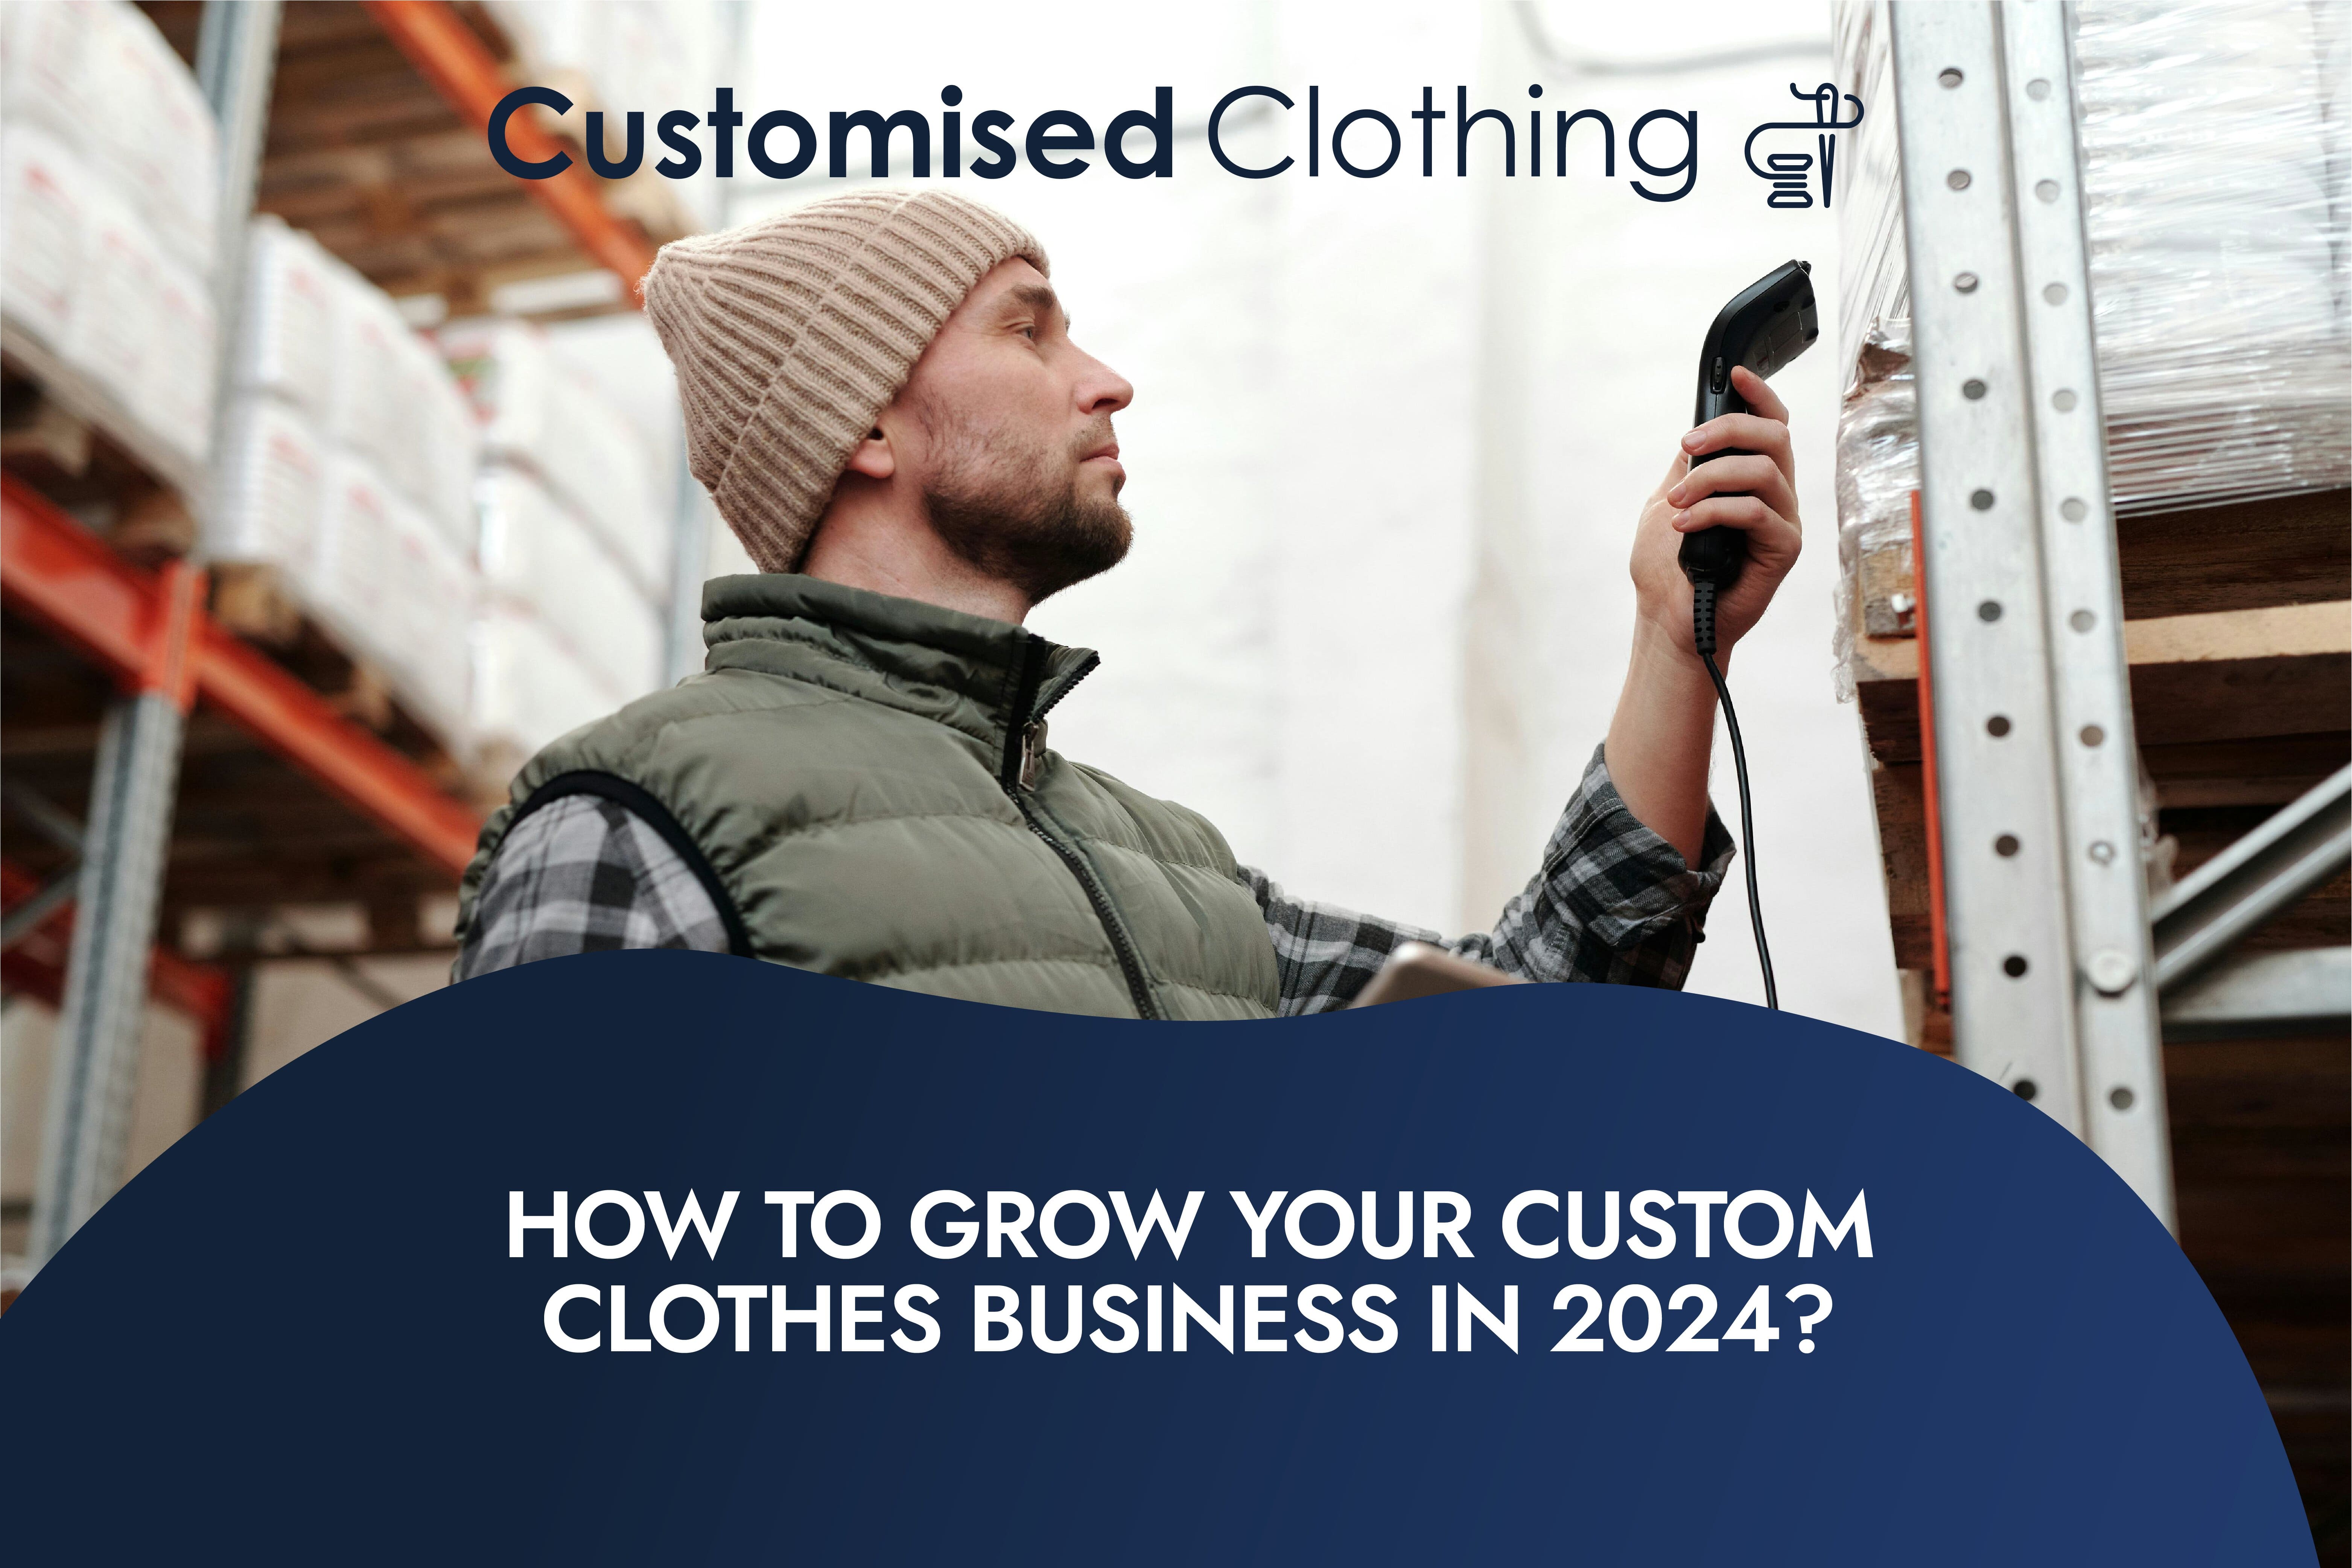 How to Grow Your Custom Clothes Business in 2024?